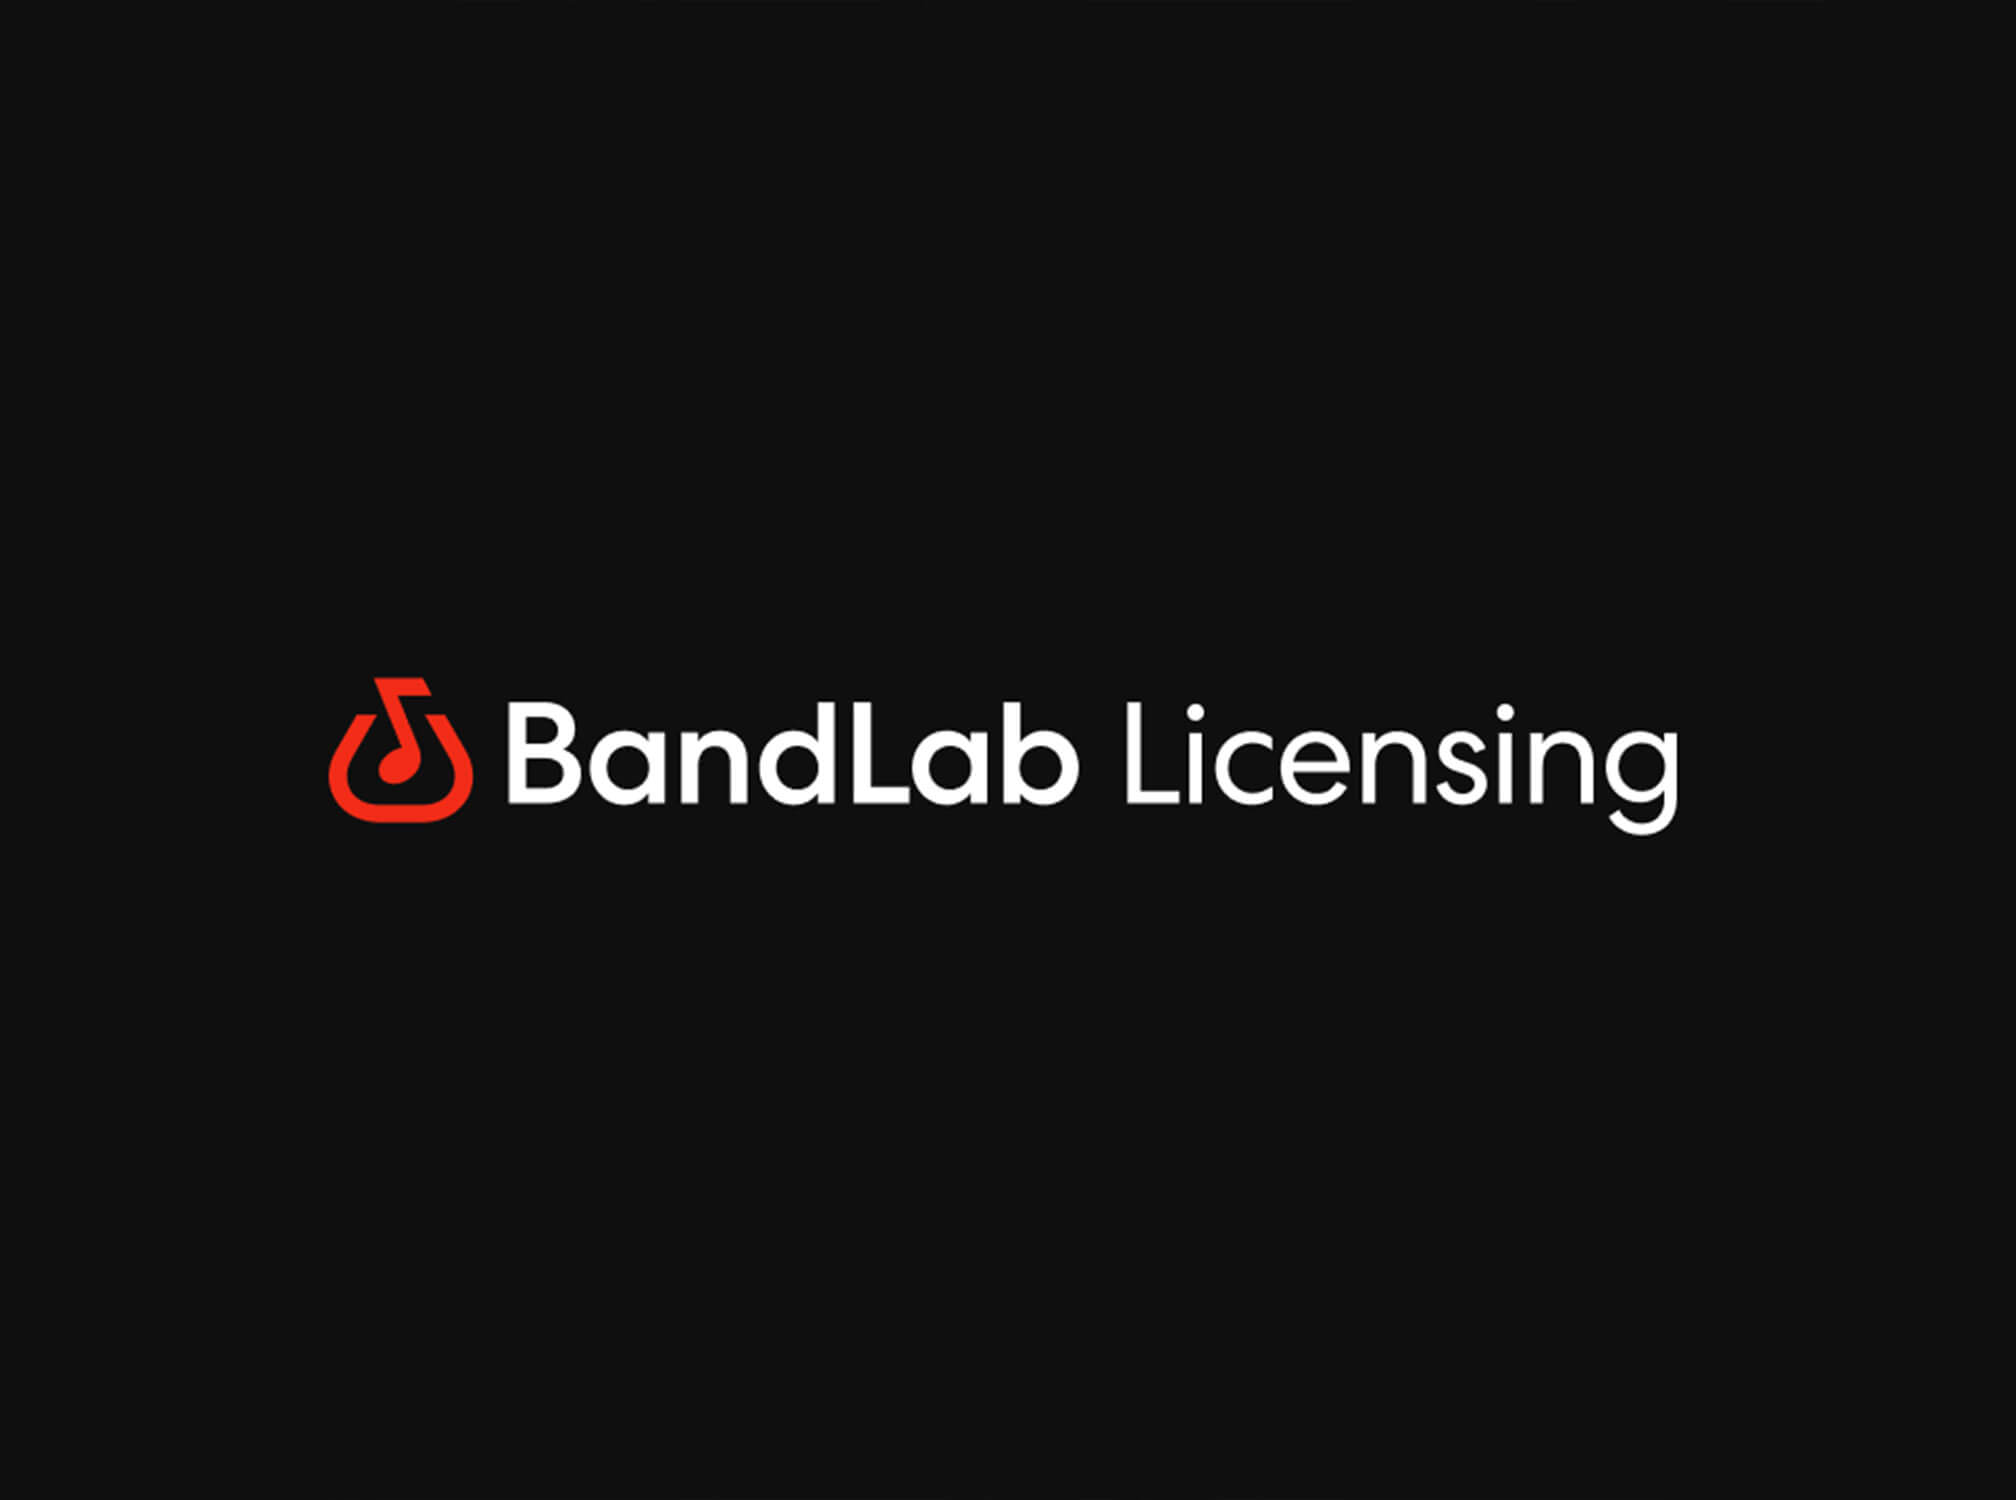 BandLab introduces sync licensing for creators